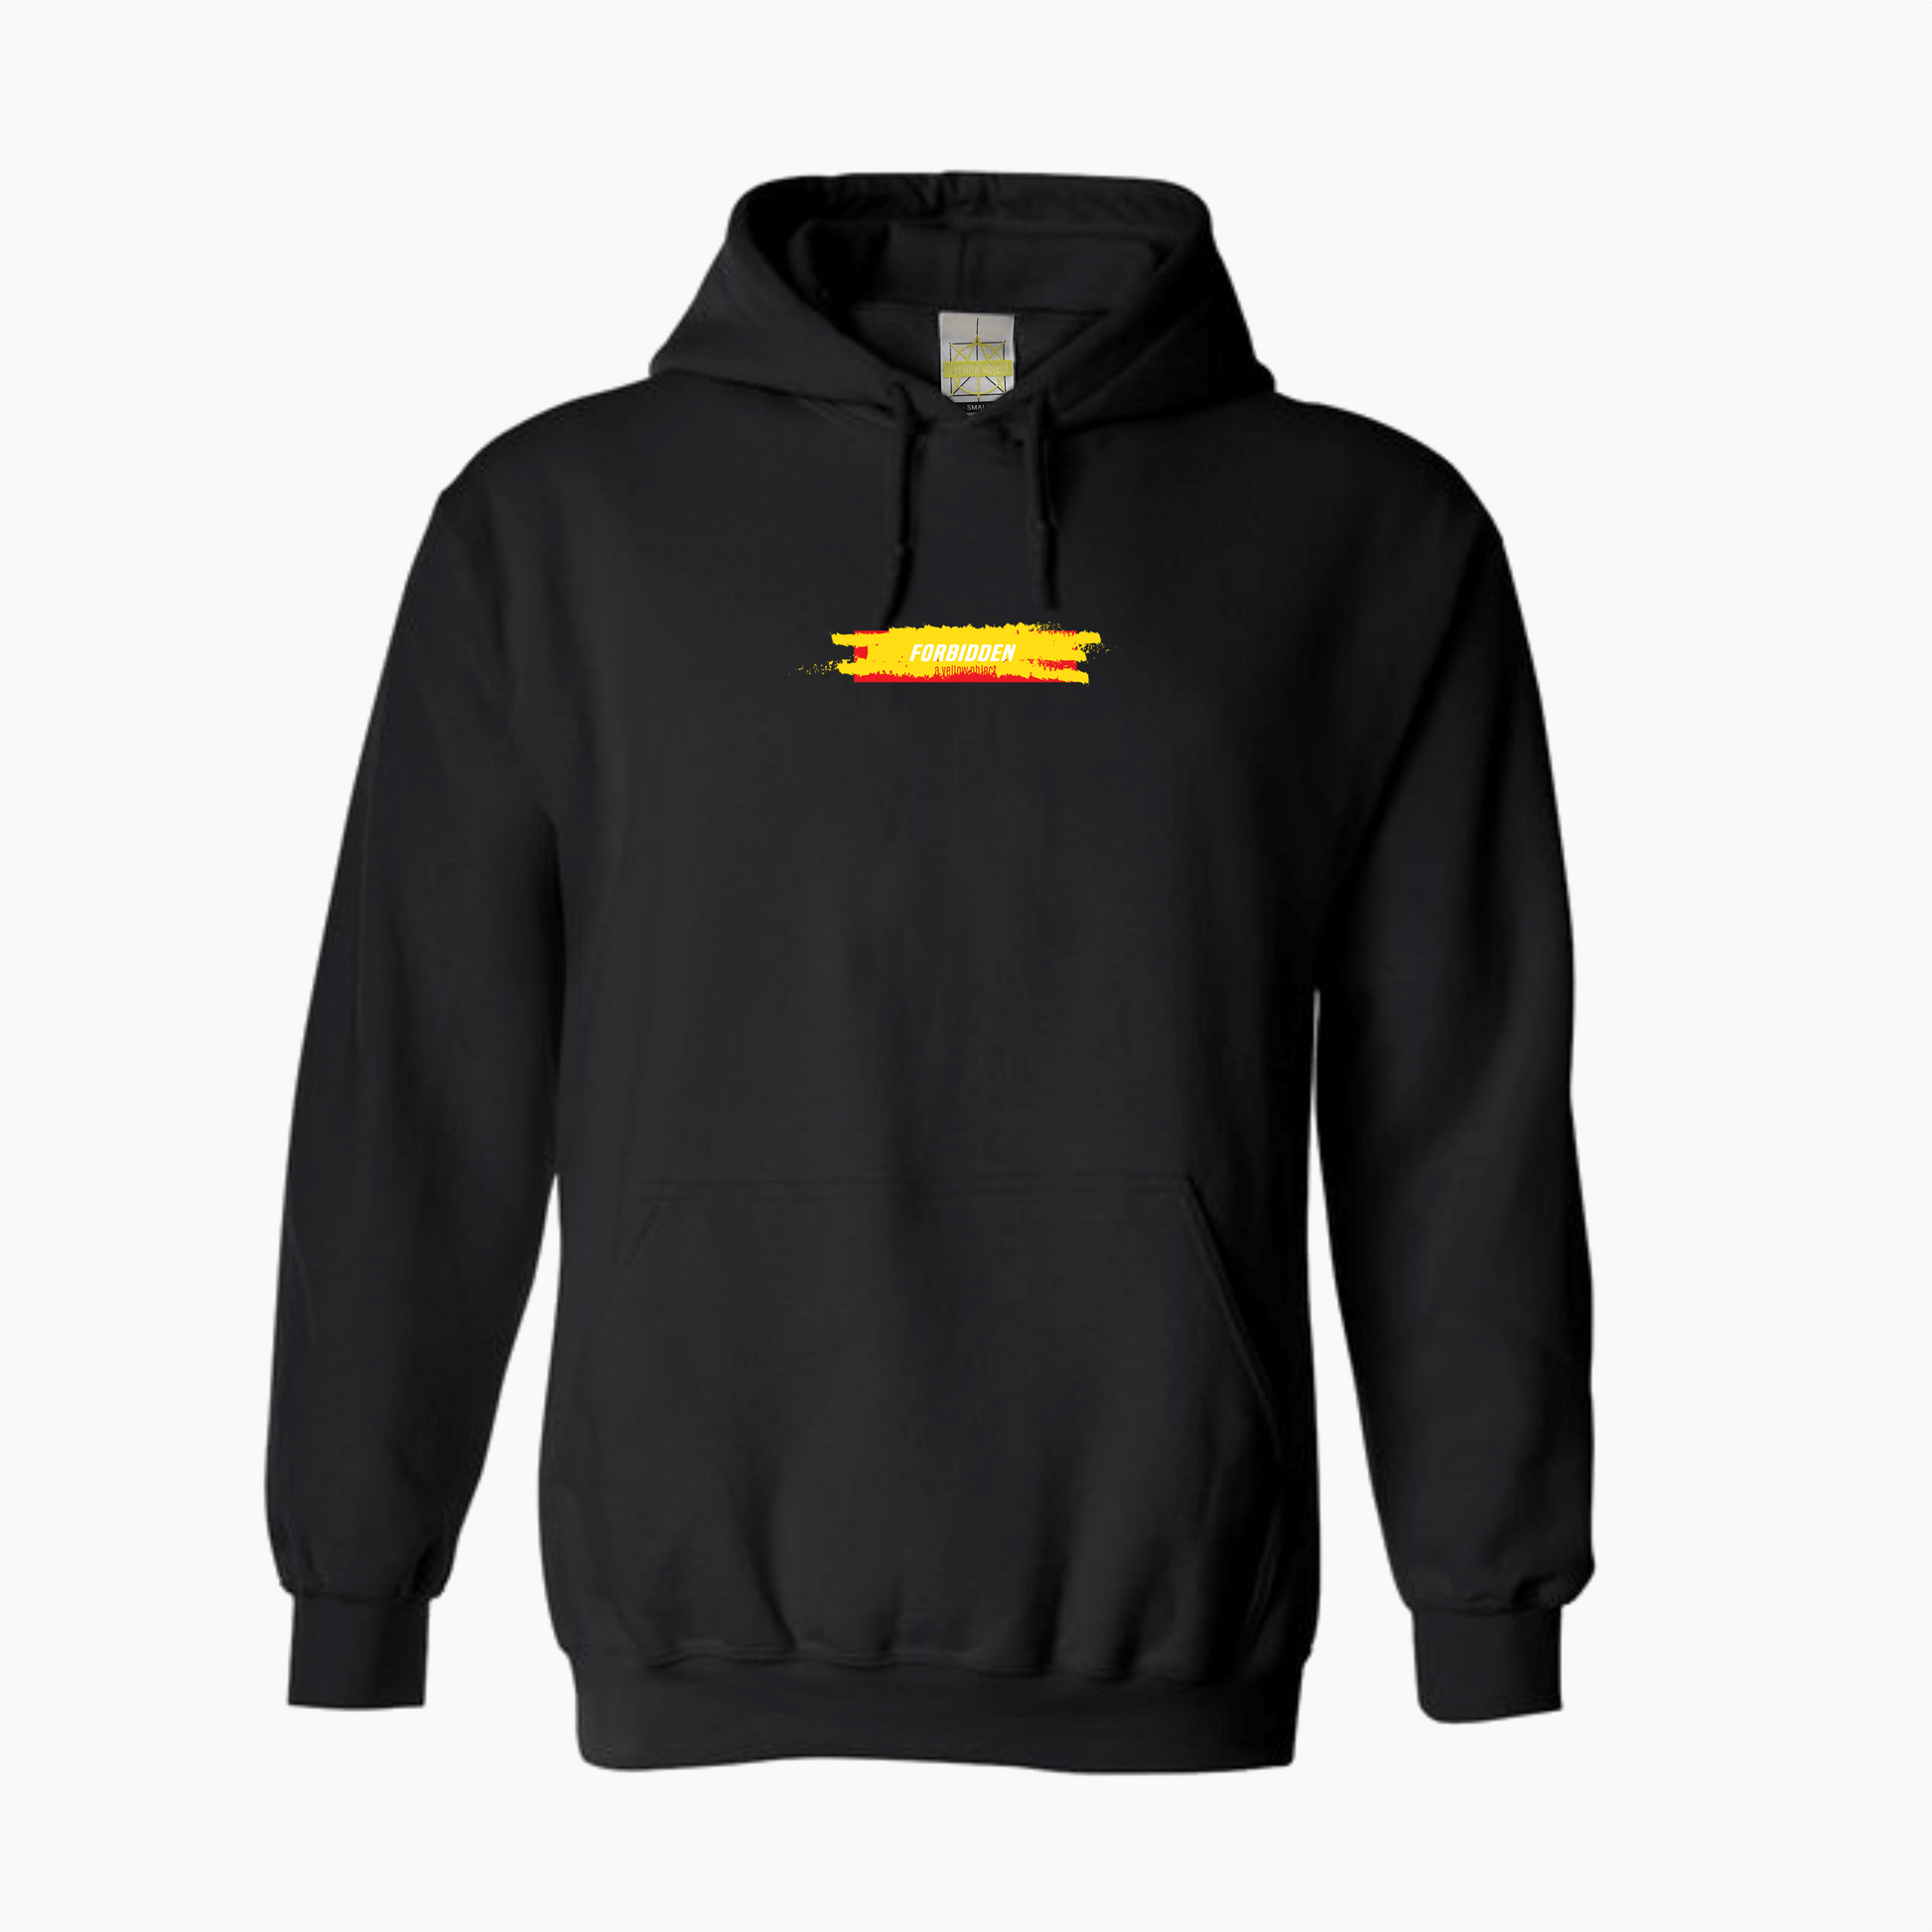 Forbidden Paint Hoodie (Black) - A Yellow Object